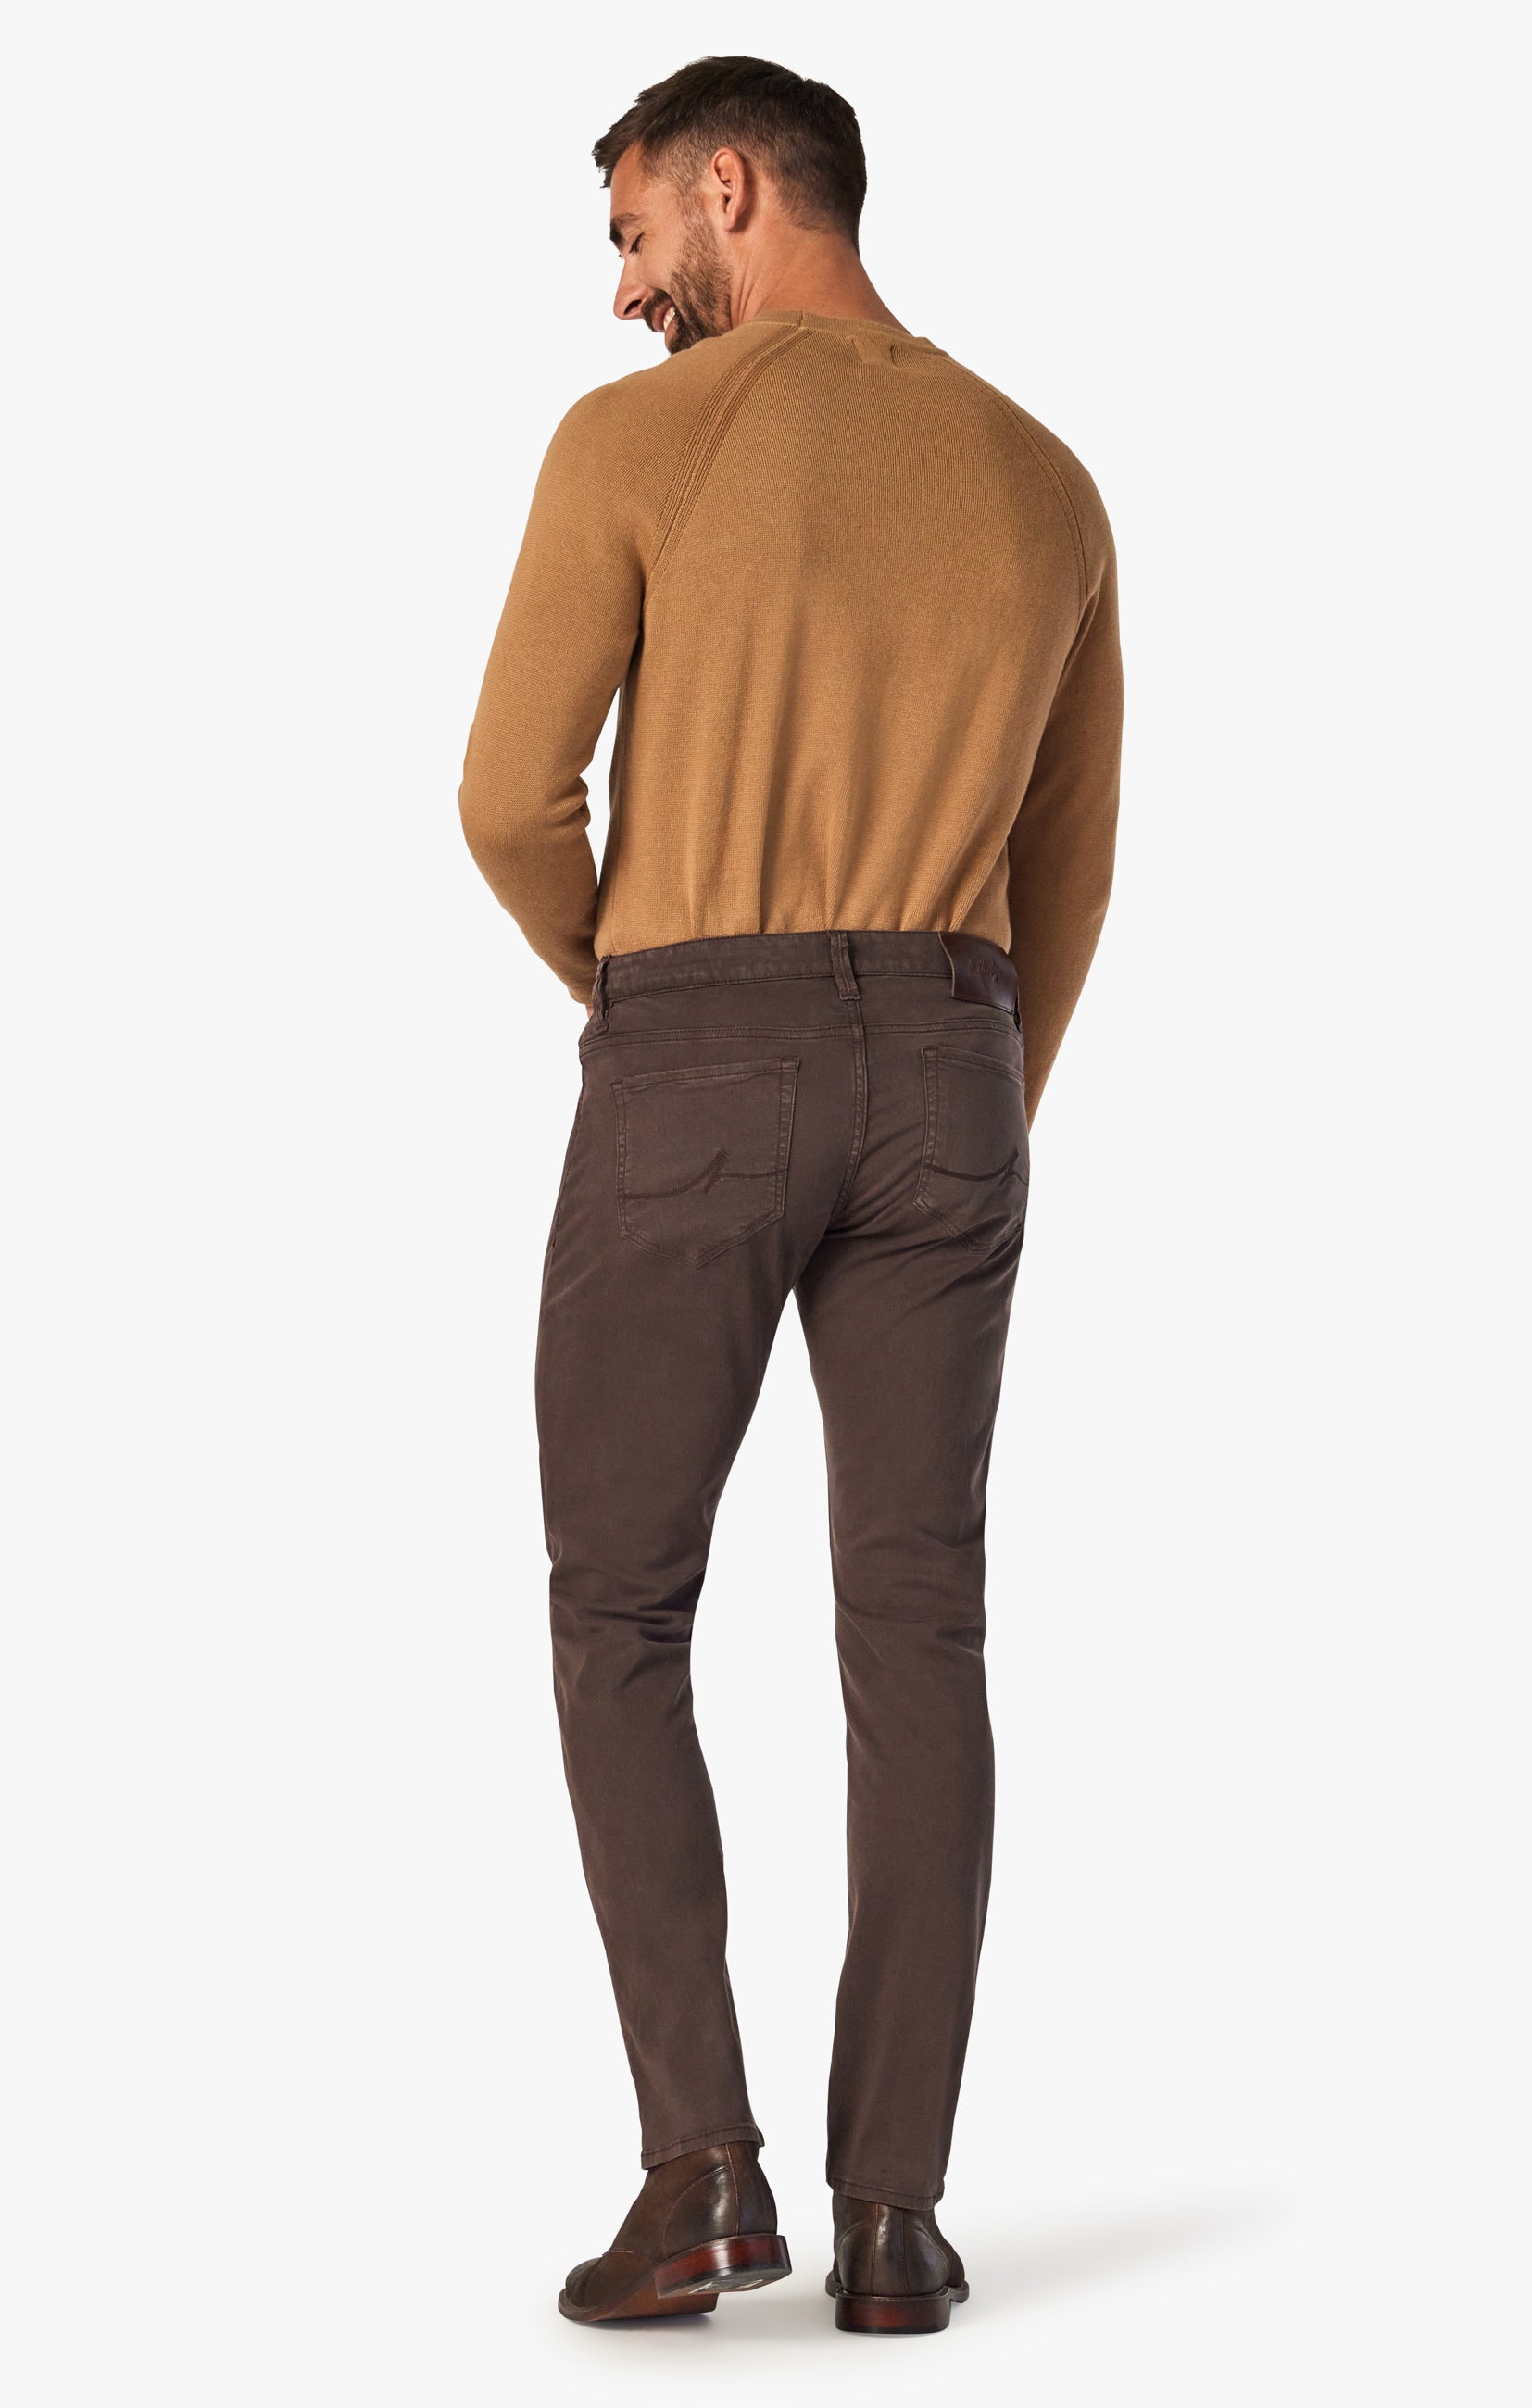 Cool Tapered Leg Pants In Fudge Twill Image 3